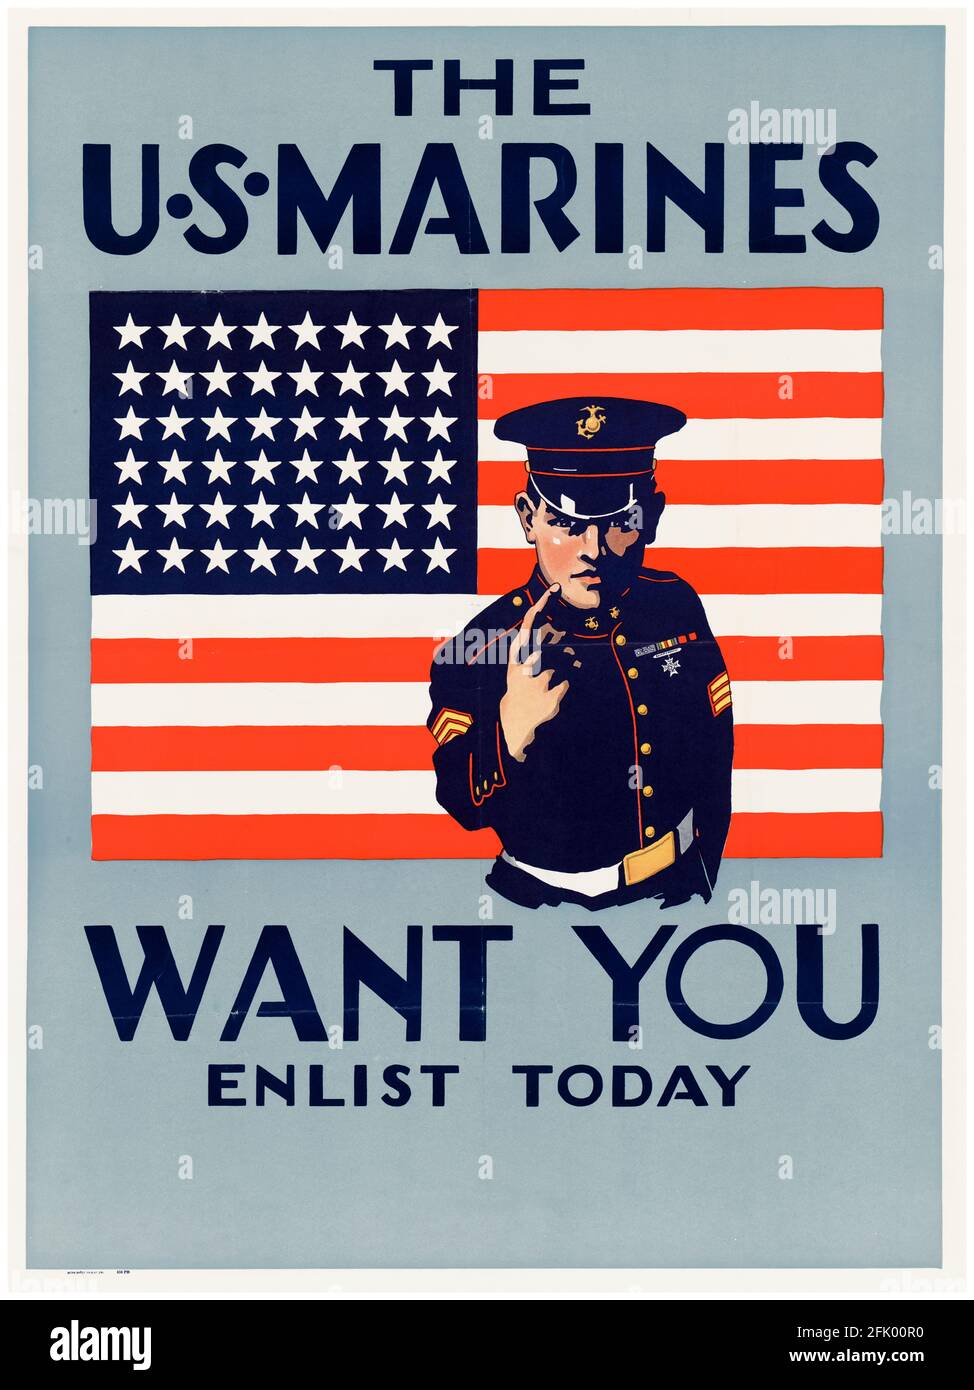 The US Marines Want YOU, Enlist Today: American, WK2 Military Recruitment Poster, (USMC), 1942-1945 Stockfoto